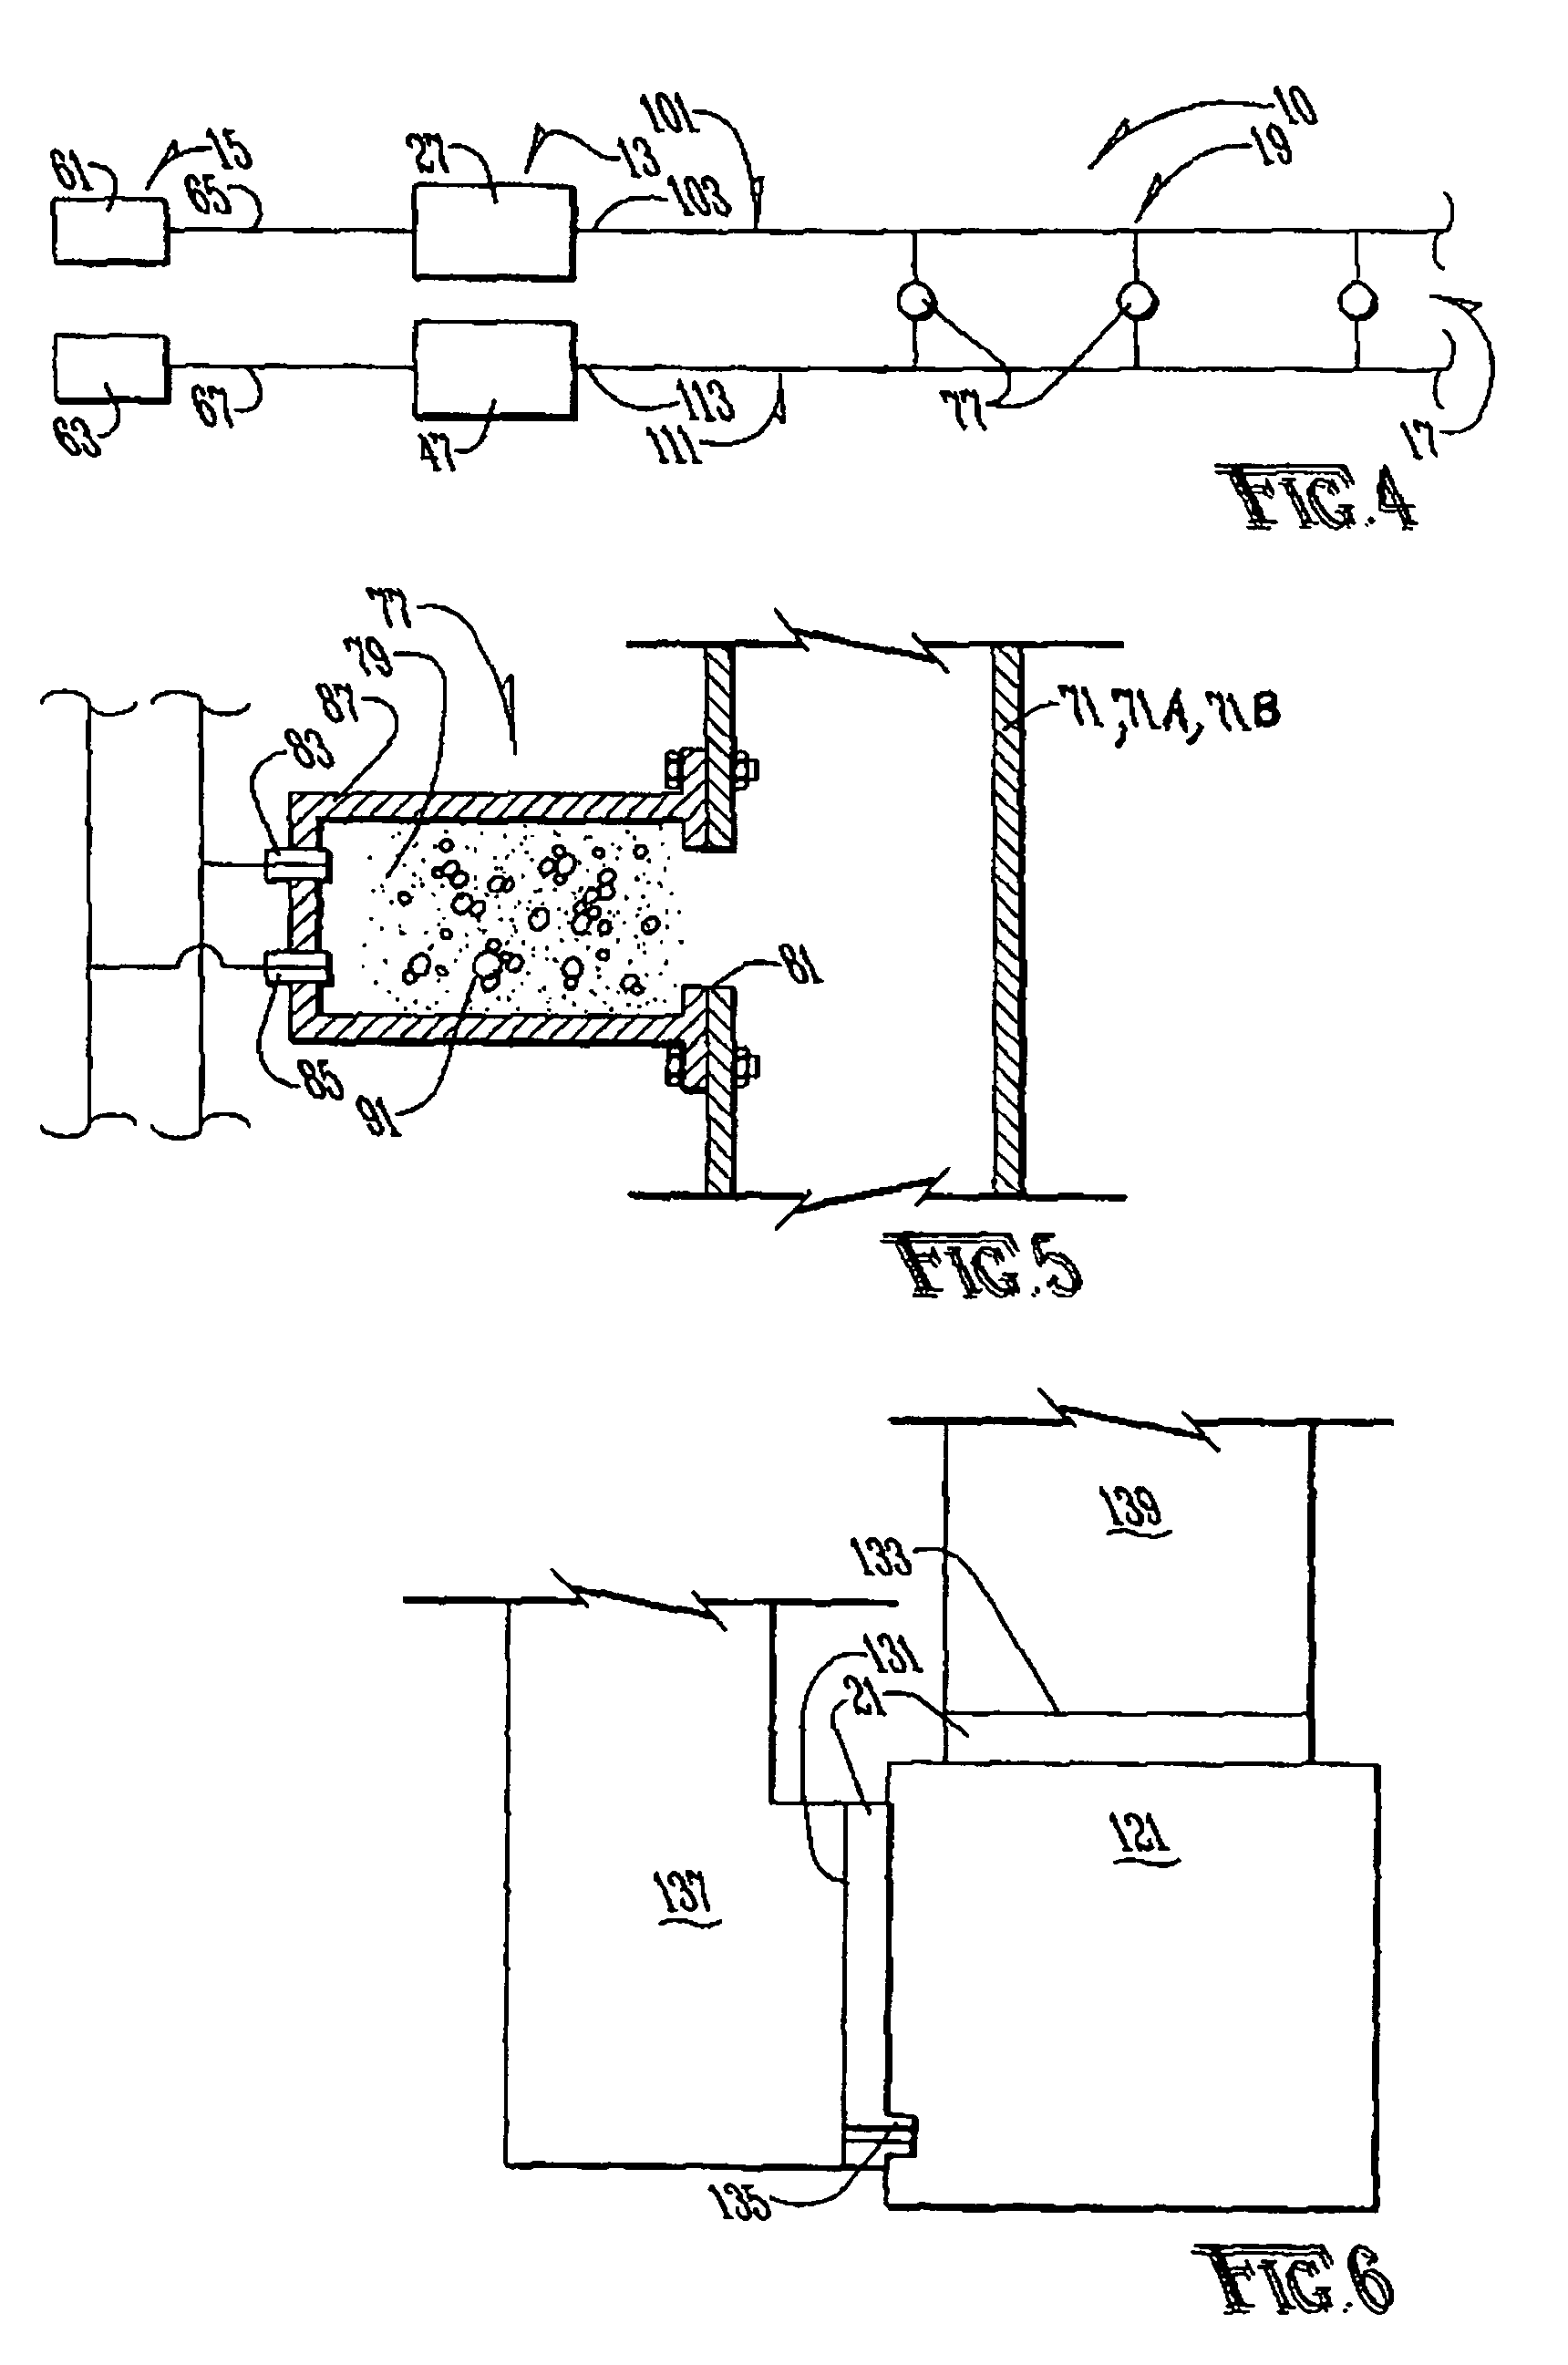 Apparatus and method for cleaning and decontaminating an air distribution system